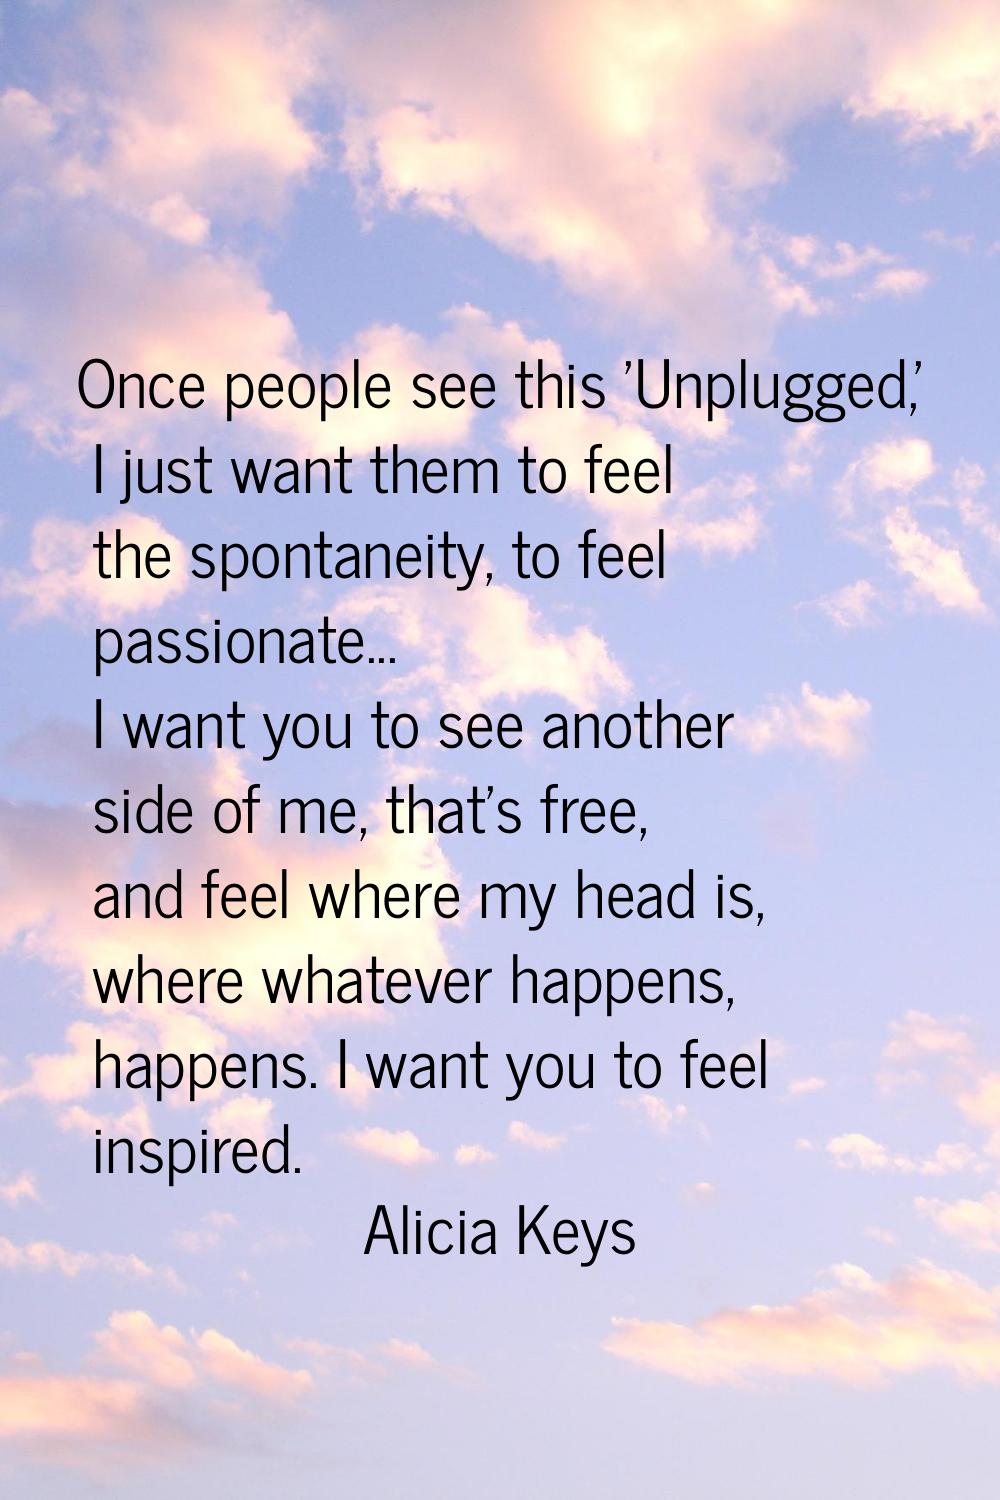 Once people see this 'Unplugged,' I just want them to feel the spontaneity, to feel passionate... I